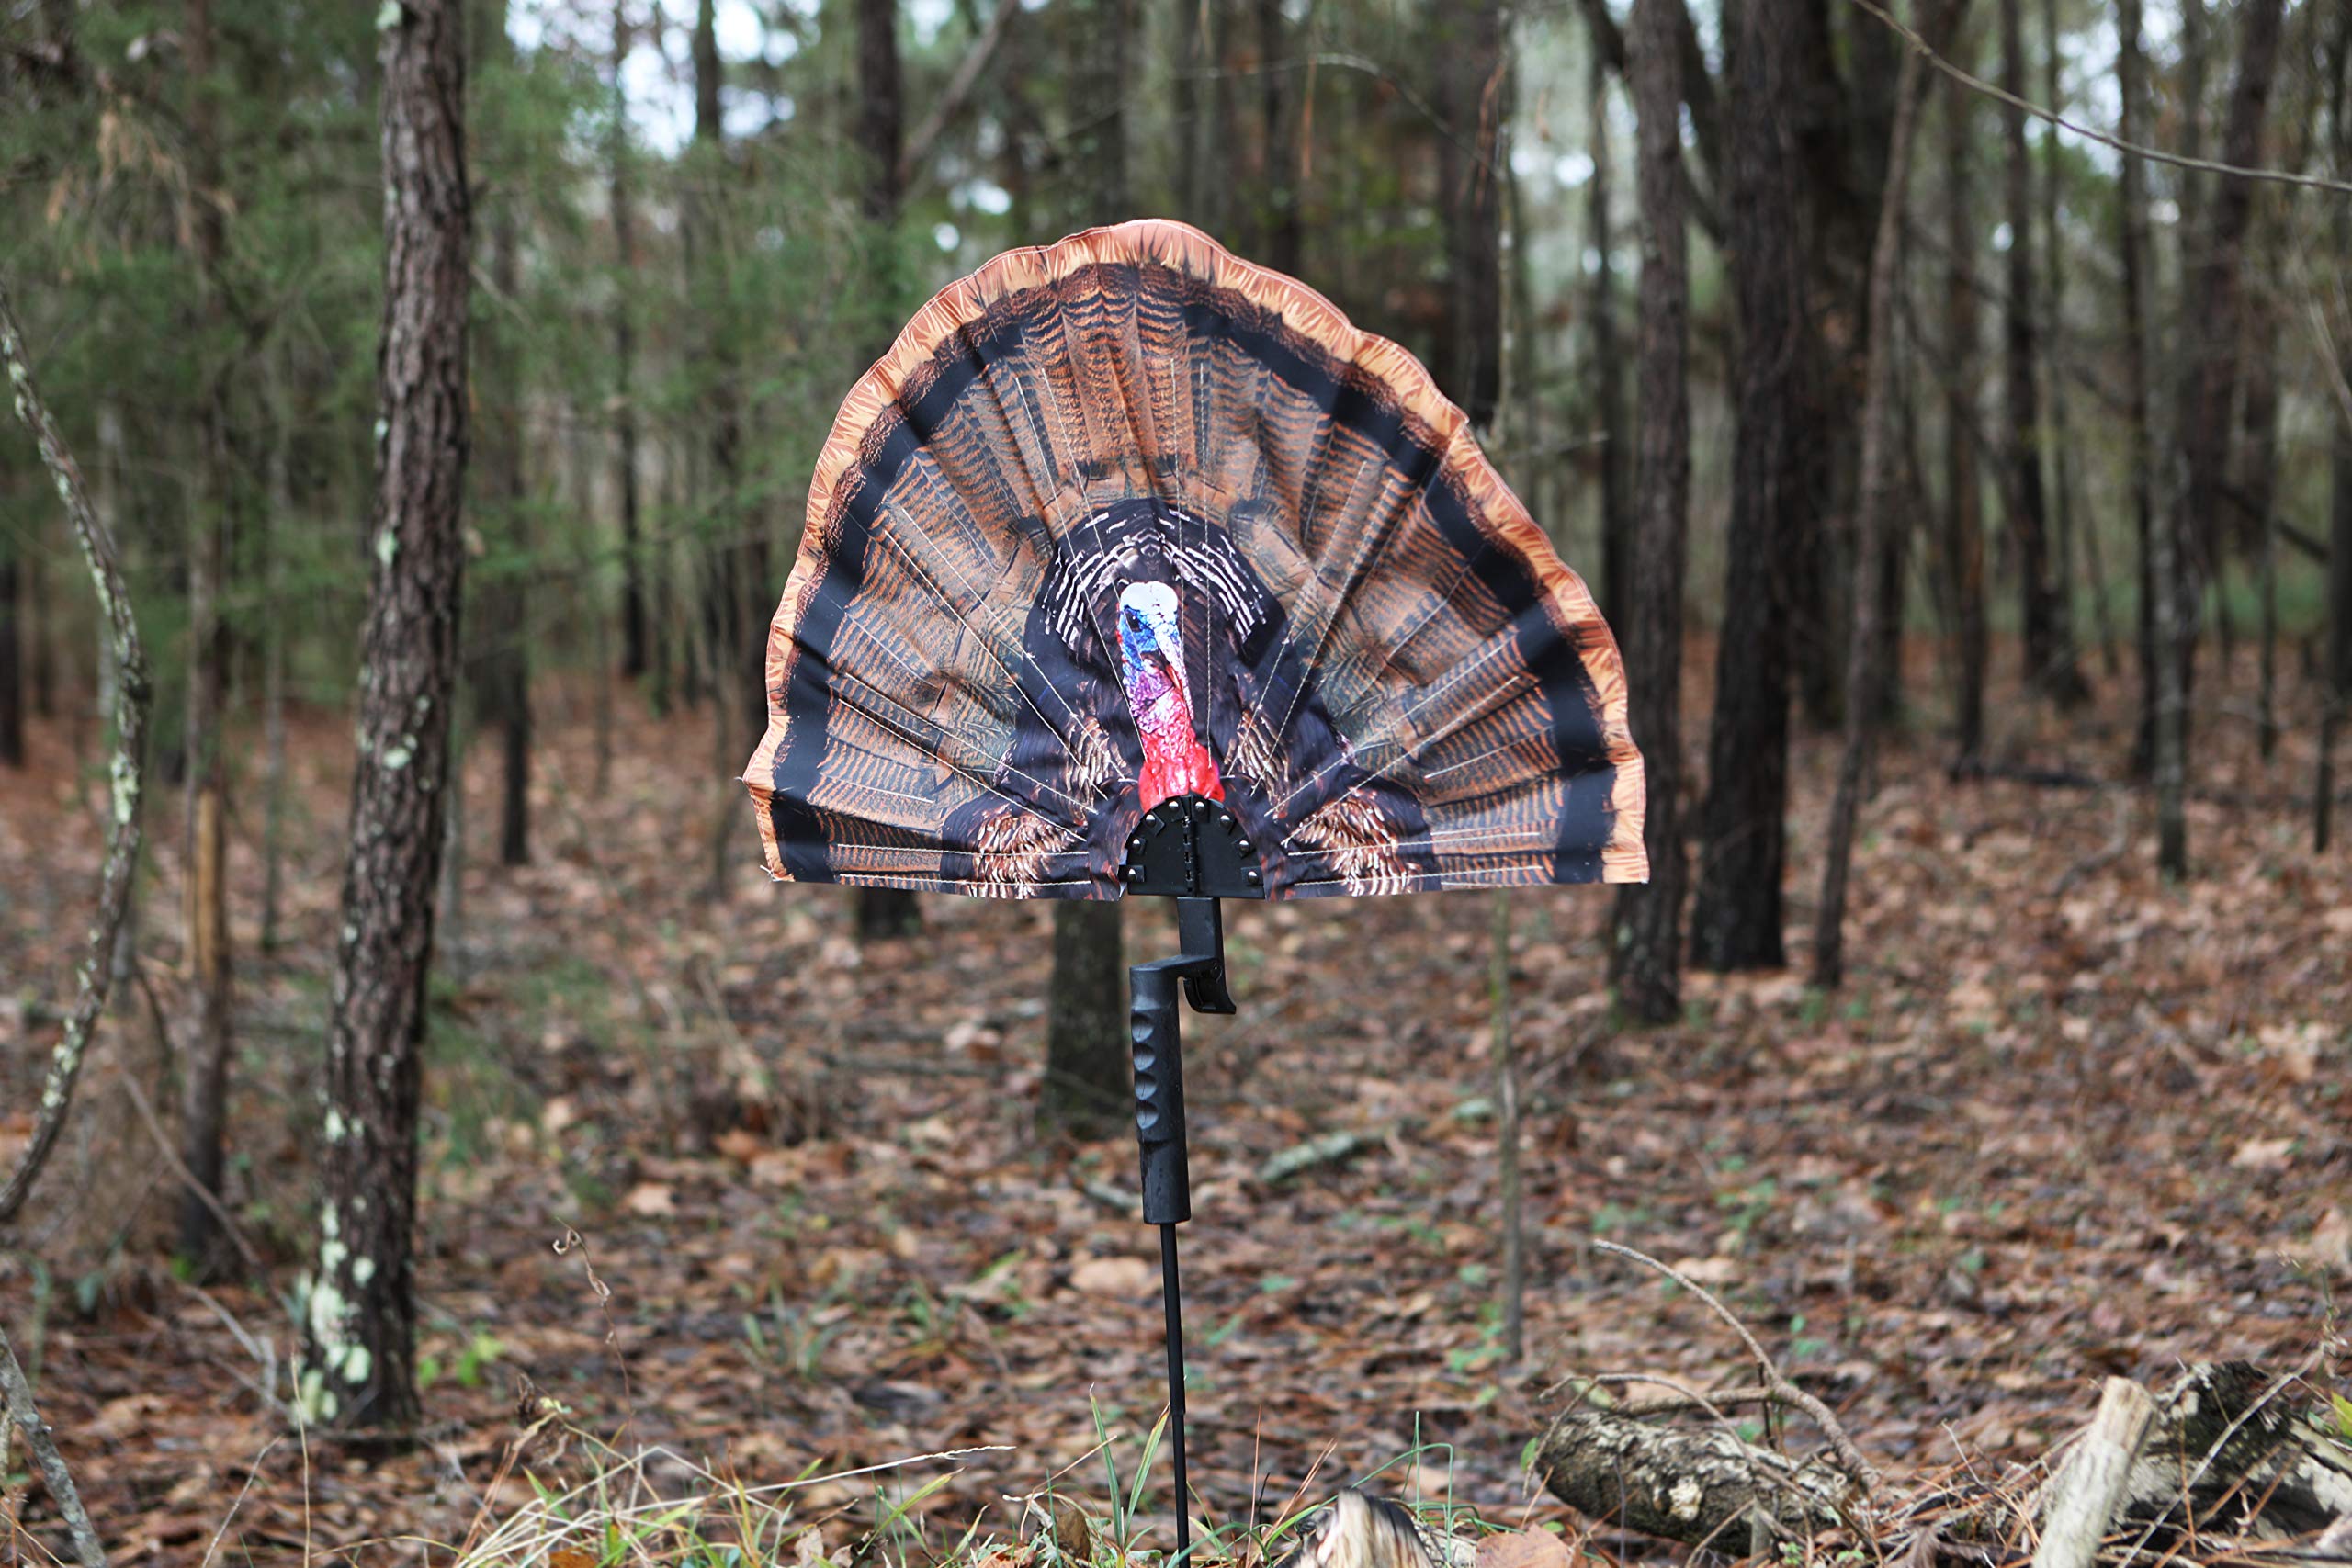 MOJO Outdoors Fatal Fan Turkey Hunting Decoy, Realistic Artificial Fan with Photo Head Mounted Stake, Turkey Hunting Gear and Accessories